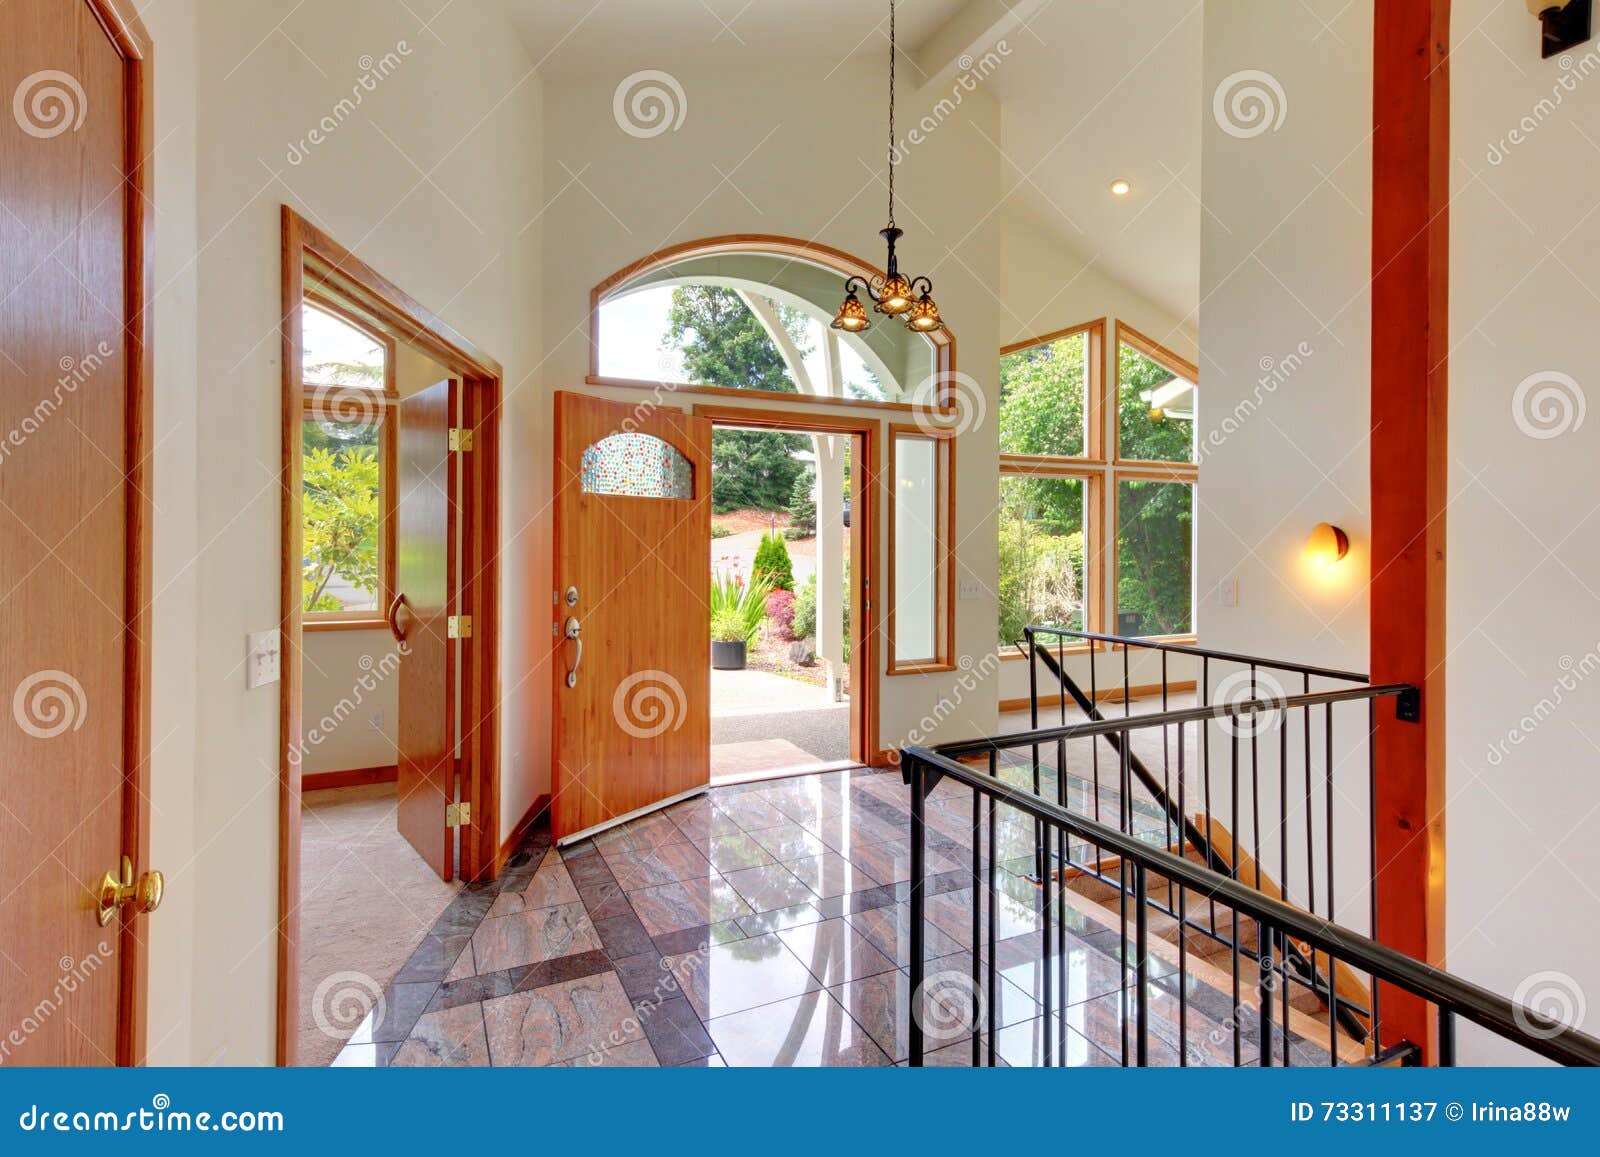 Bright Entry Way With Tile Floor And Staircase With Metal